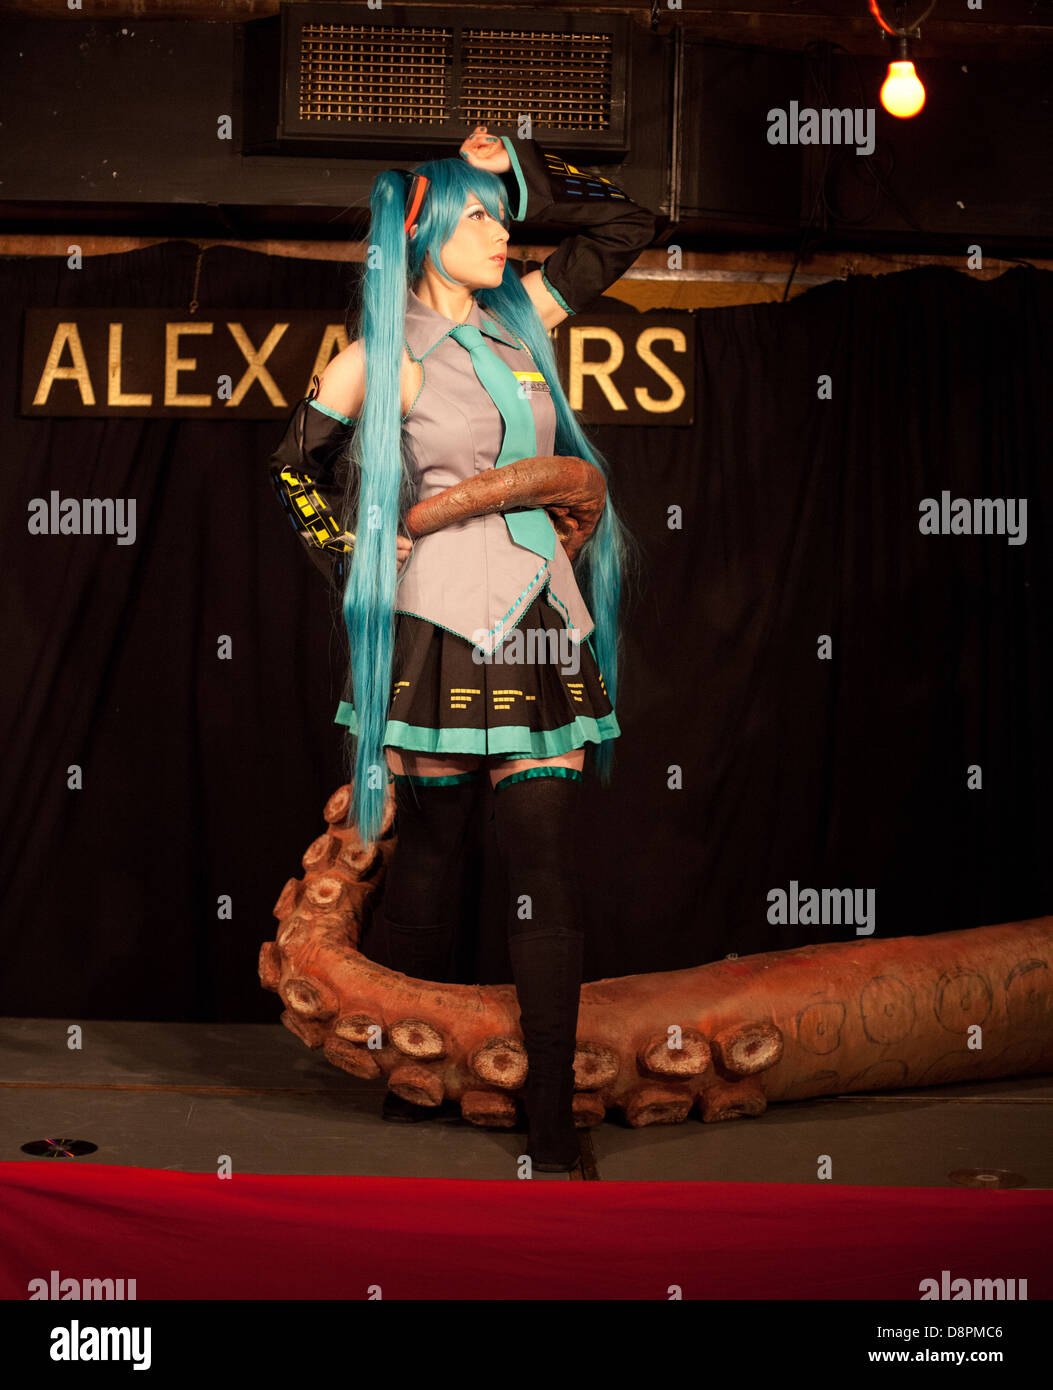 Cosplay /anime performer poses onstage with a big fake octopus tentacle at a Dr Sketchy burlesque life drawing event Stock Photo